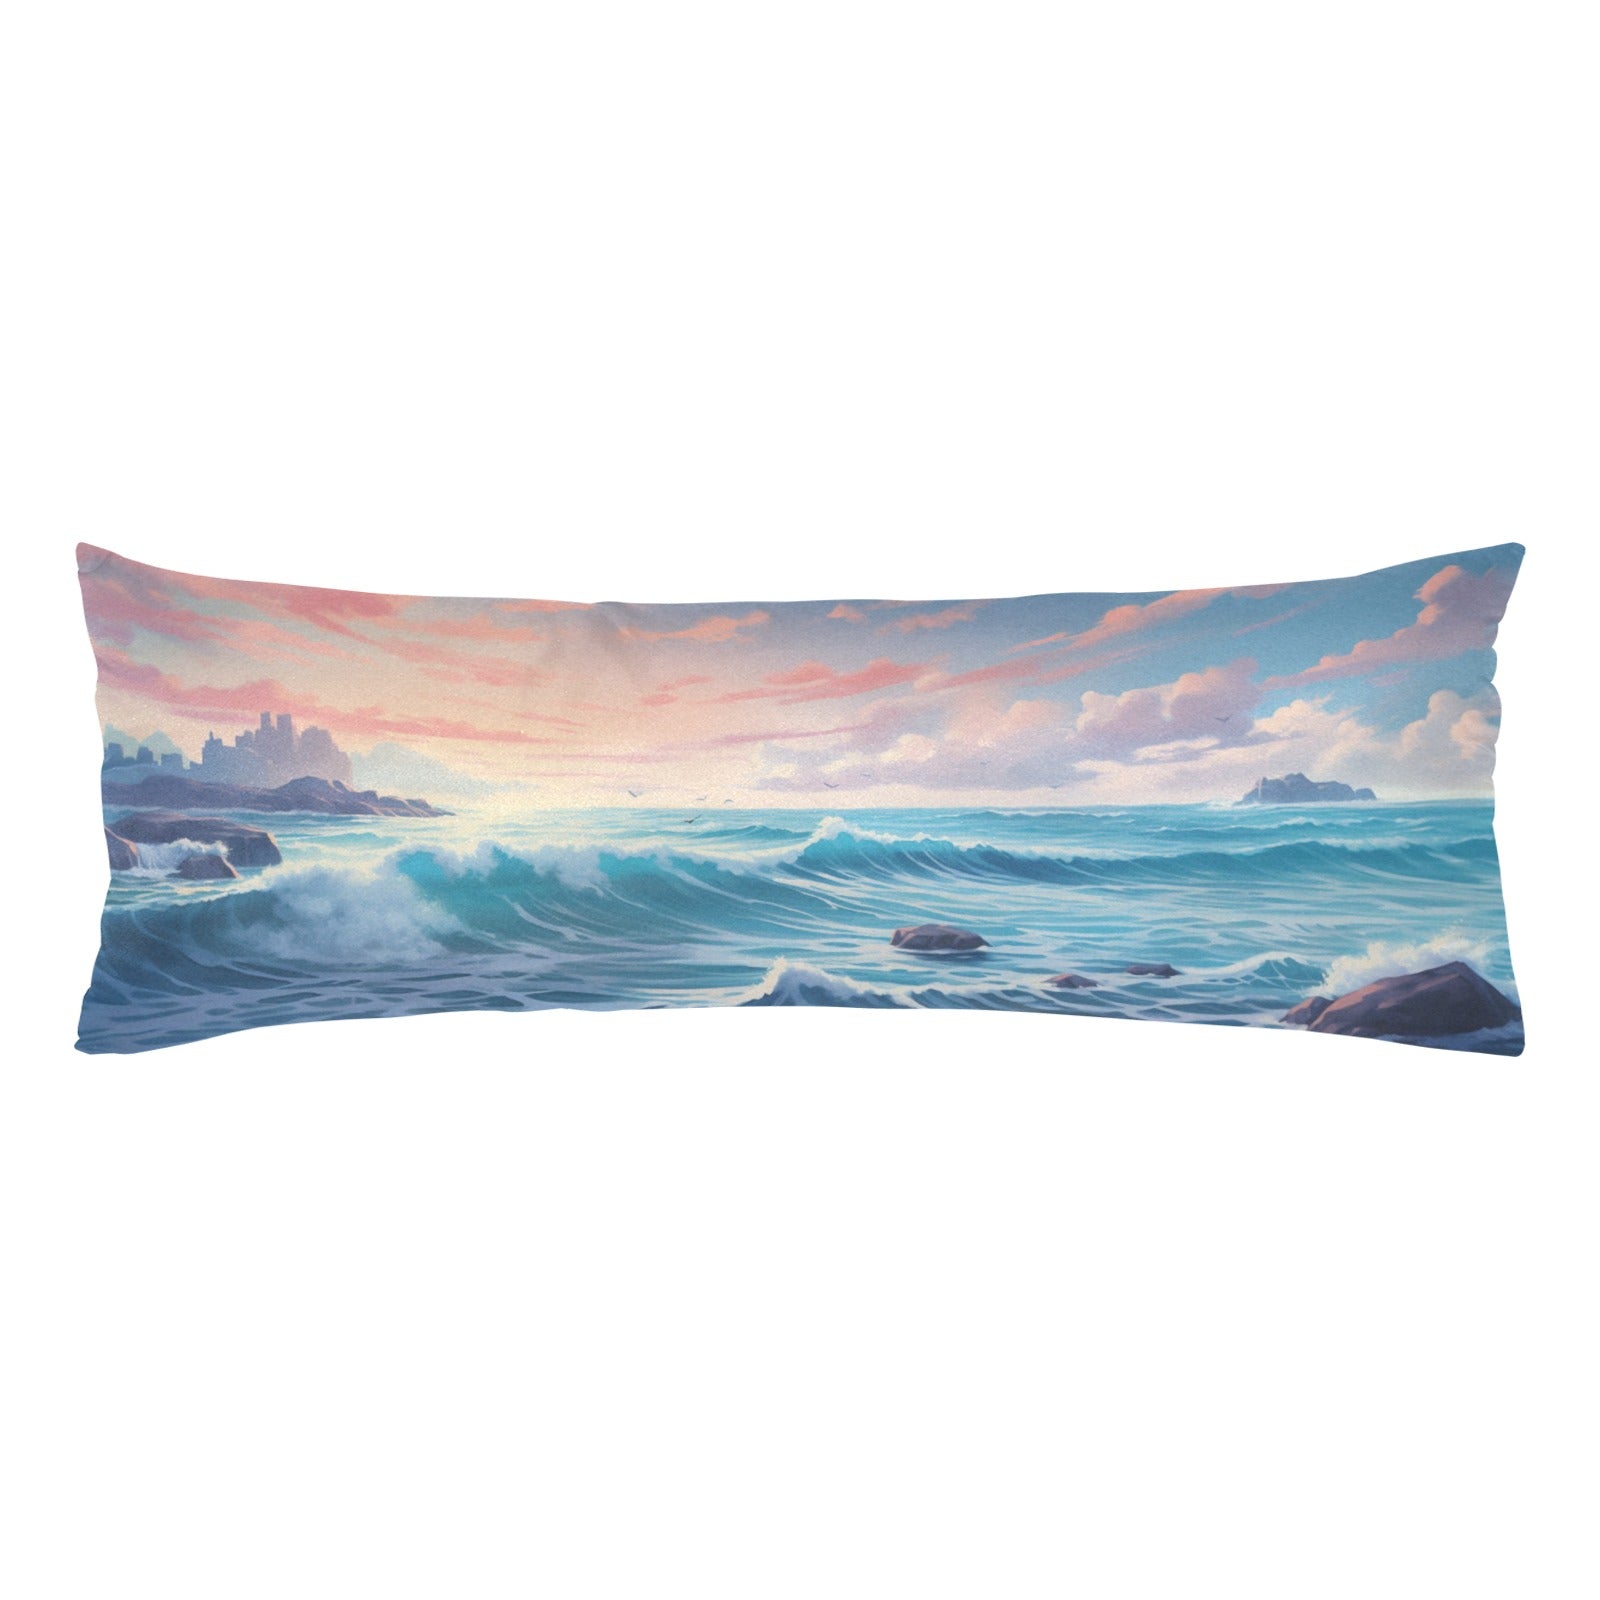 Ocean Body Pillow Case, Sunset Sea Beach Long Full Large Bed Cute Accent Print Throw Decor Decorative Cover 20x54 Satin Starcove Fashion